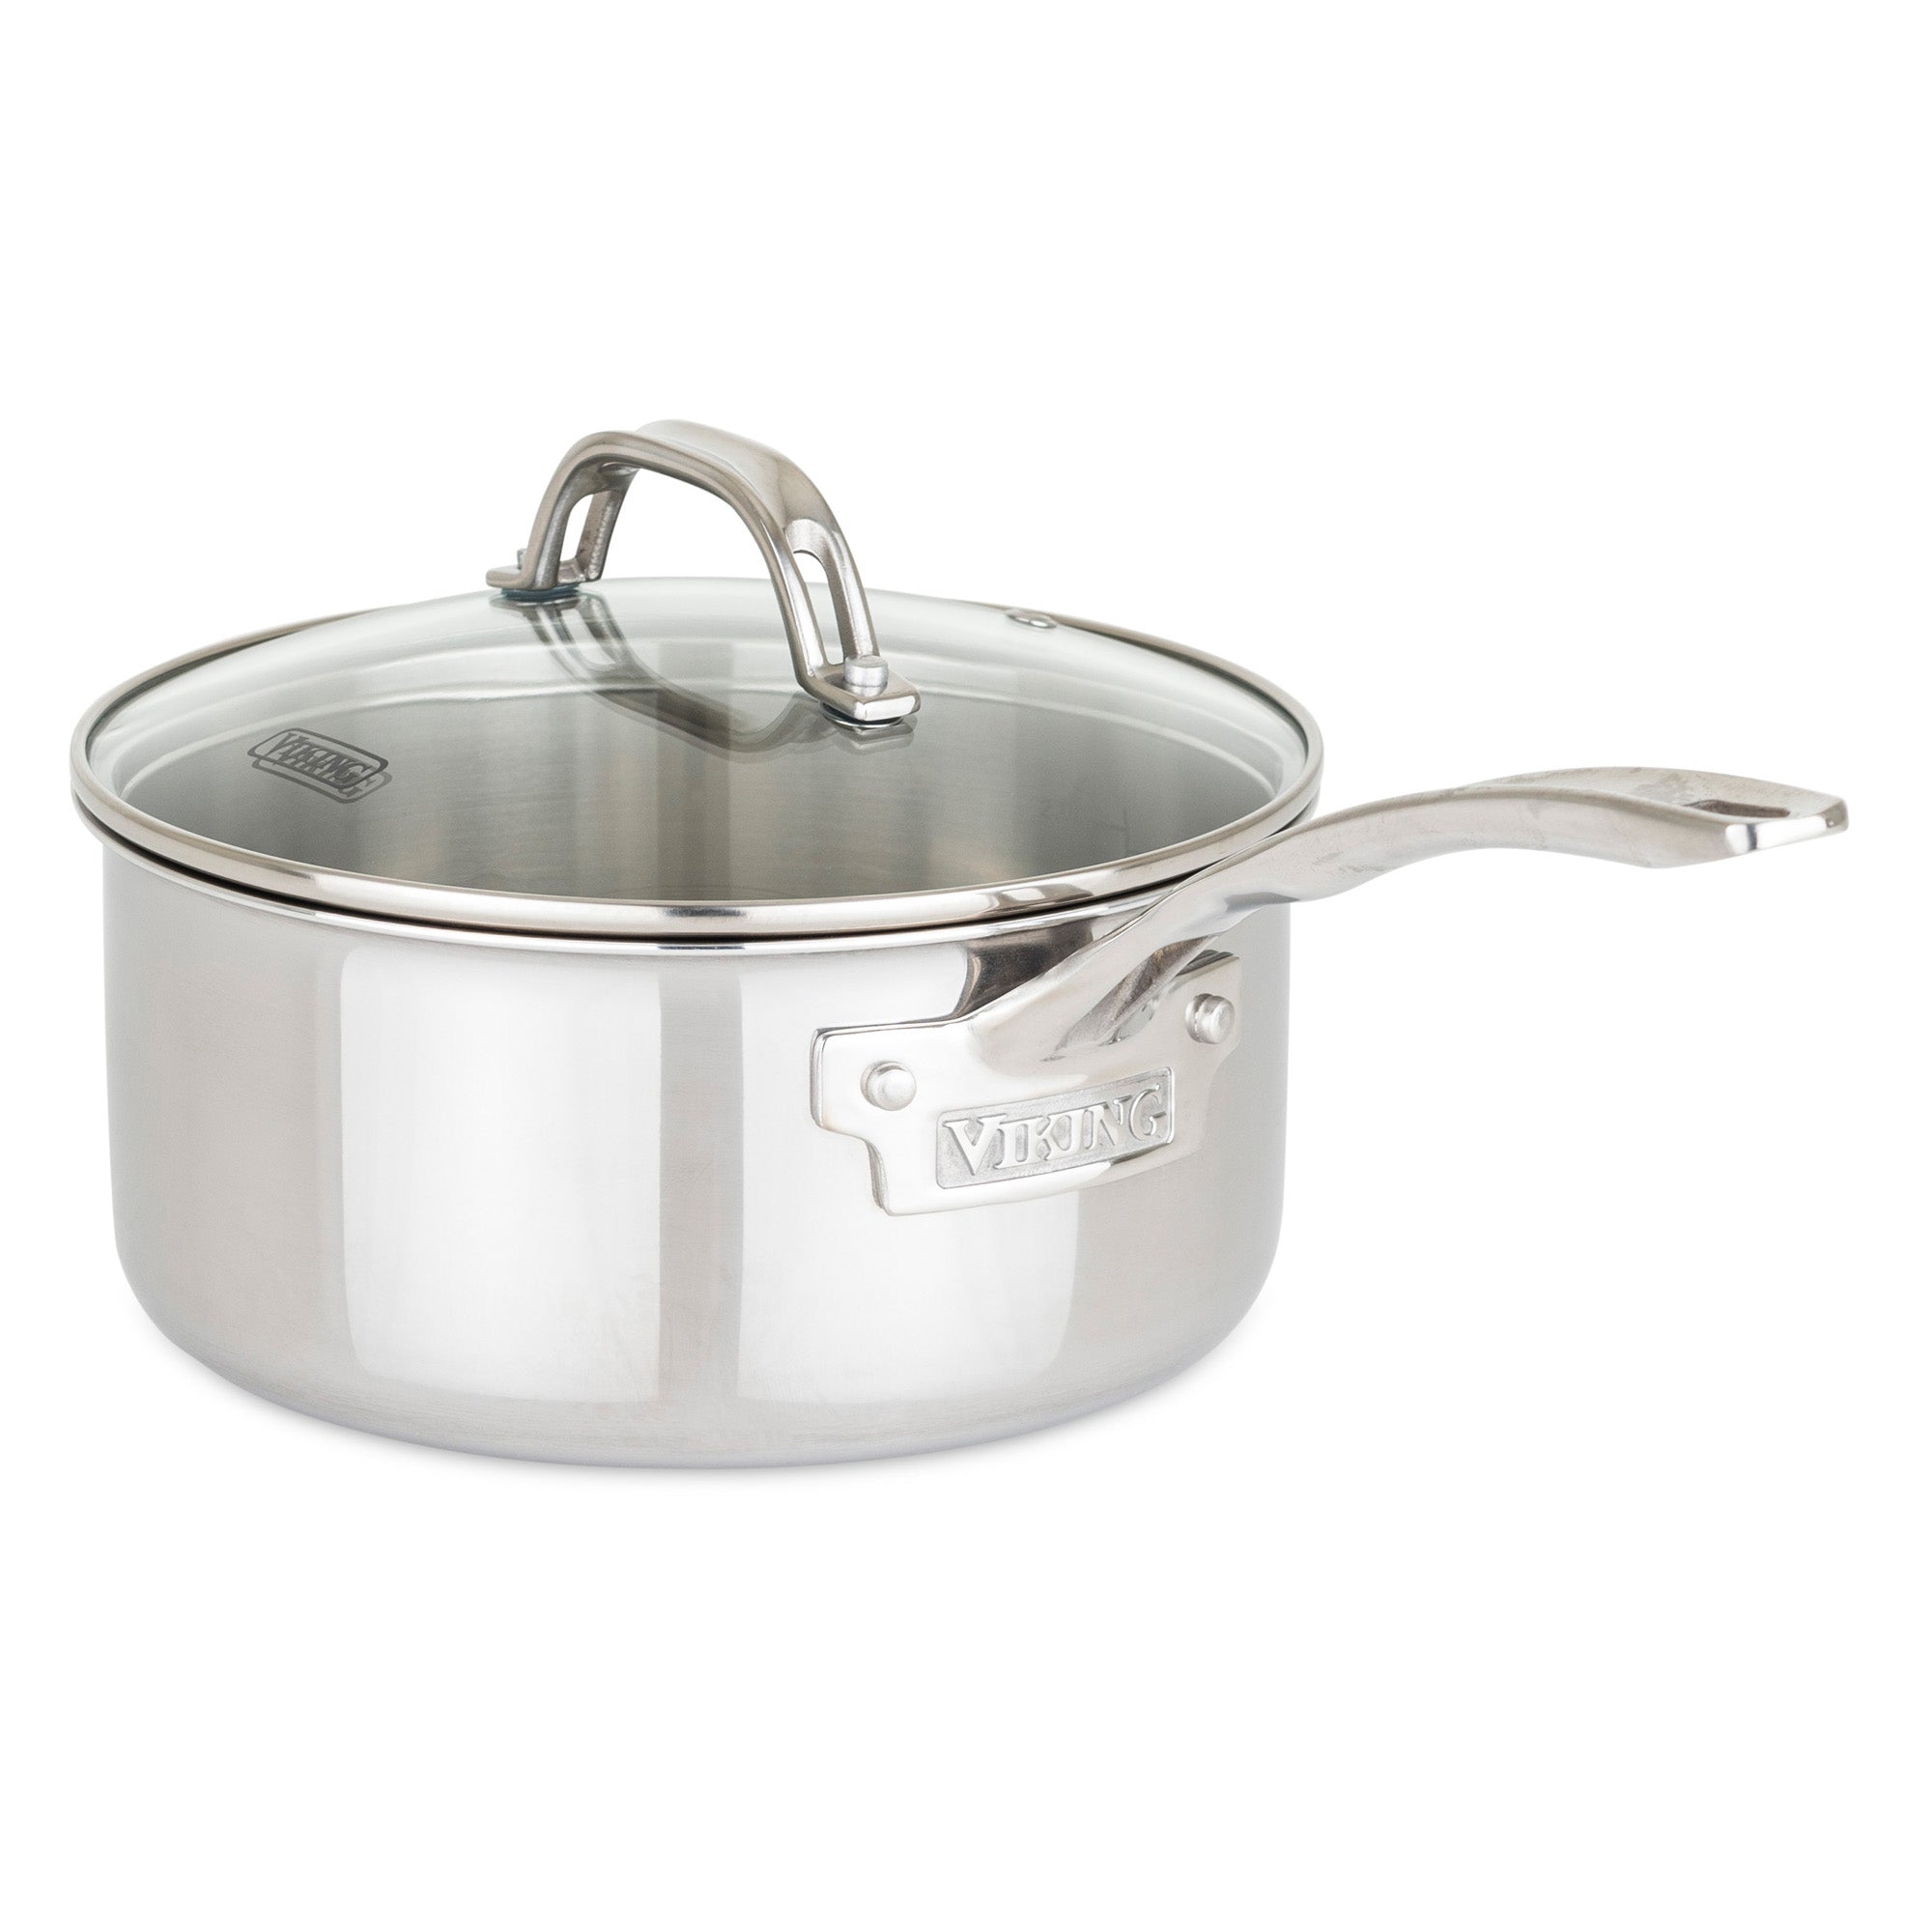 All-Clad Tri-Ply Stainless Steel 3.5 qt Sauce Pan with Lid 